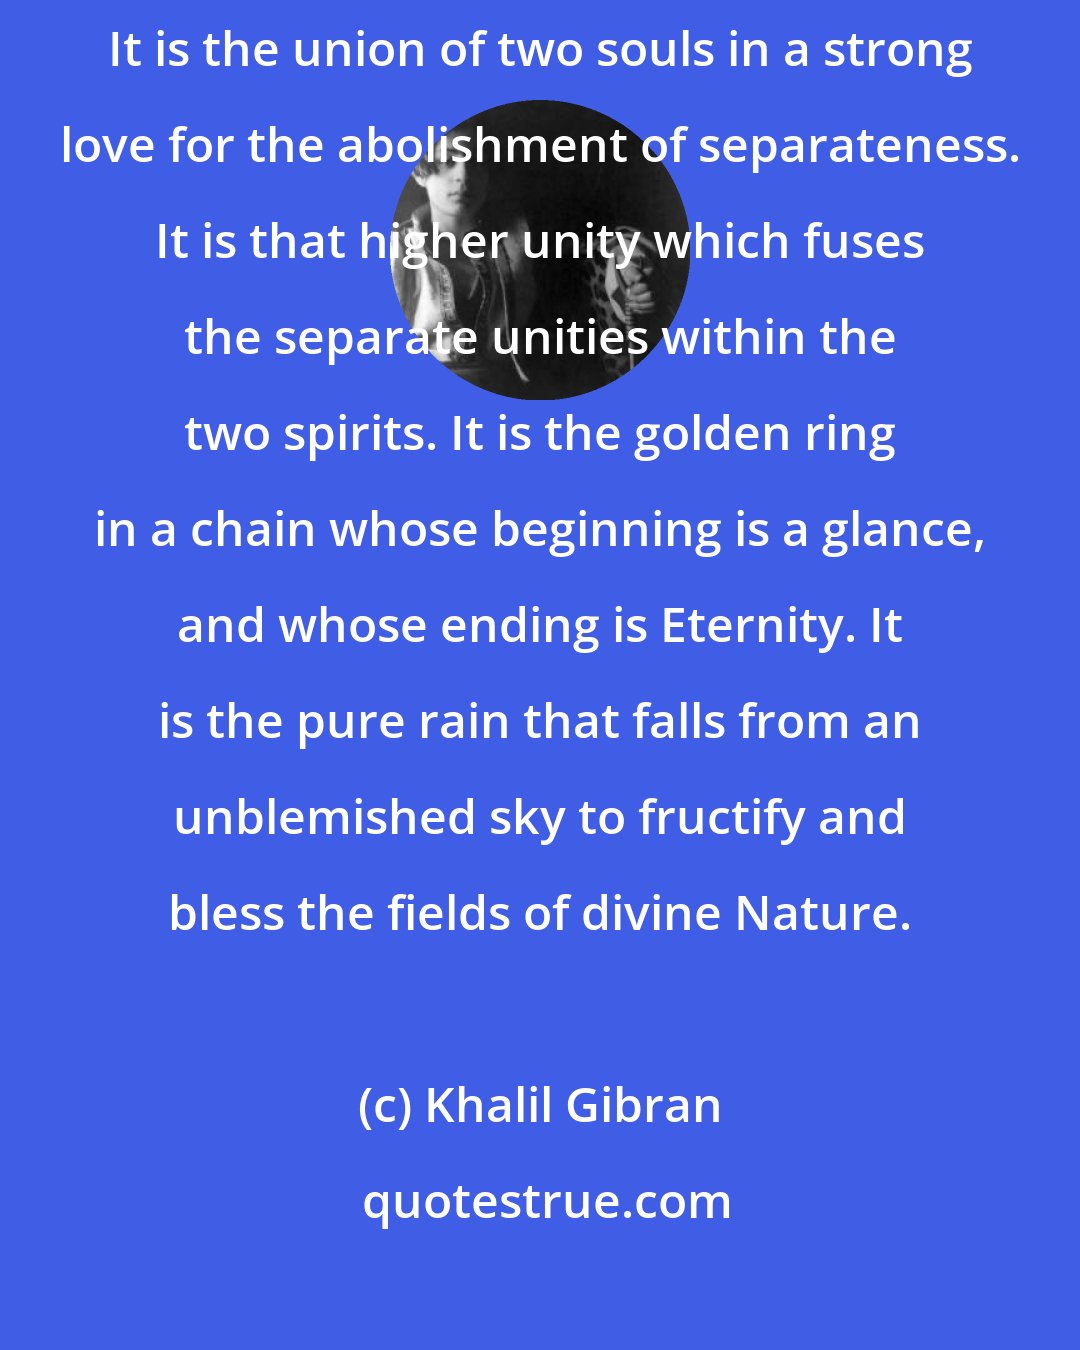 Khalil Gibran: Marriage is the union of two divinities that a third might be born on earth. It is the union of two souls in a strong love for the abolishment of separateness. It is that higher unity which fuses the separate unities within the two spirits. It is the golden ring in a chain whose beginning is a glance, and whose ending is Eternity. It is the pure rain that falls from an unblemished sky to fructify and bless the fields of divine Nature.